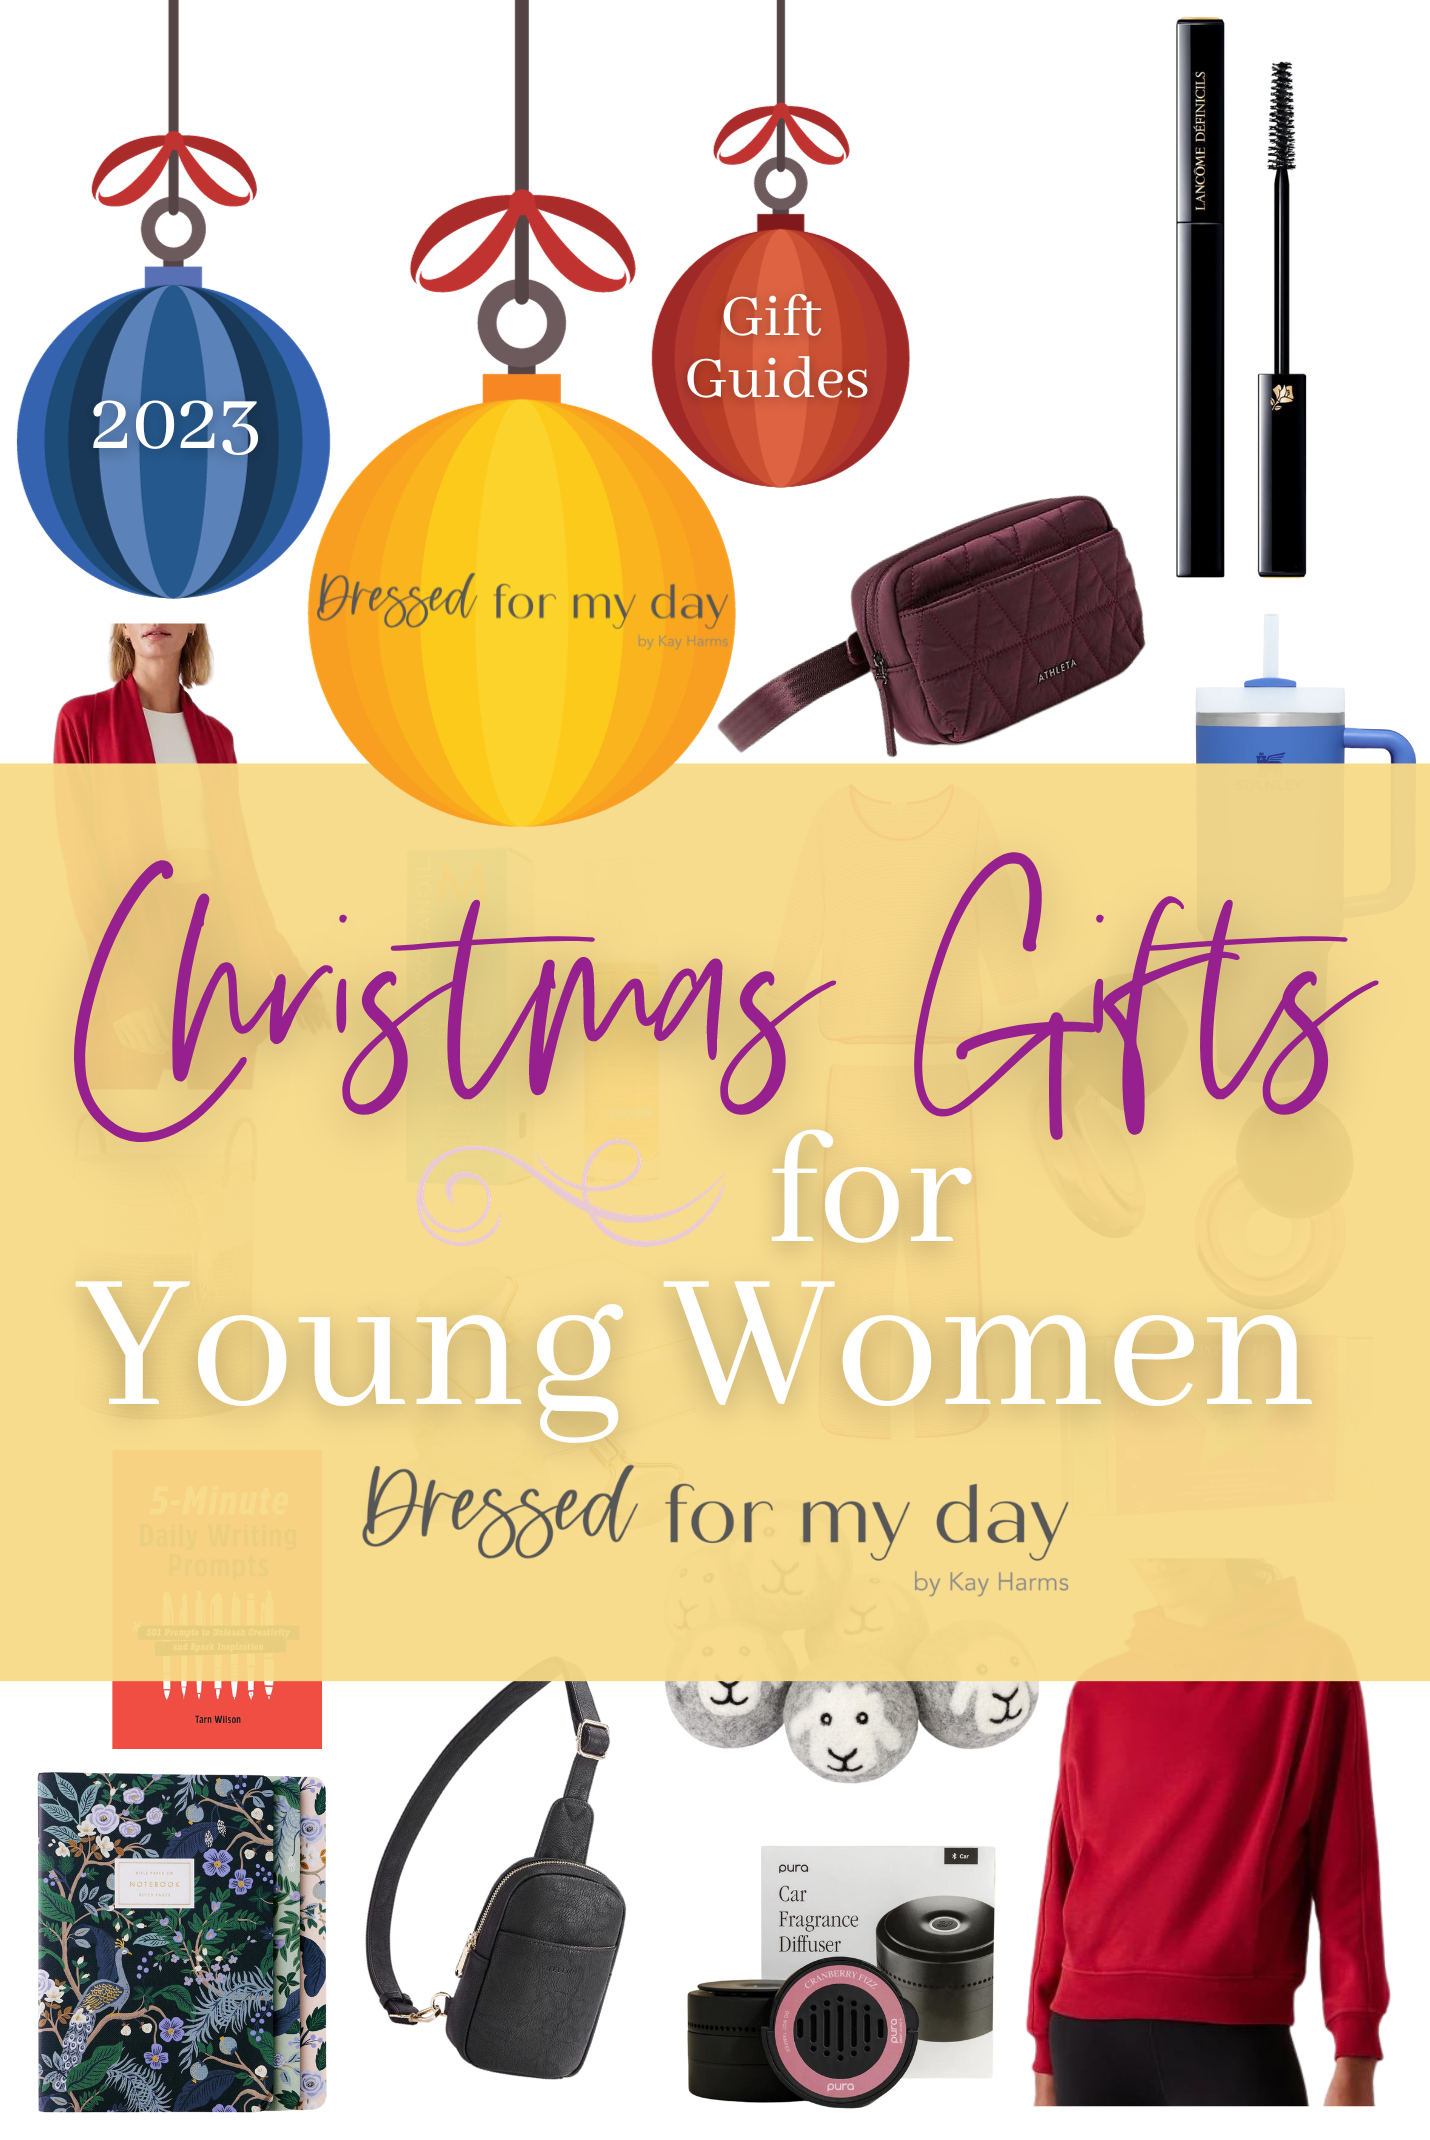 Christmas Gifts for Young Women - Dressed for My Day